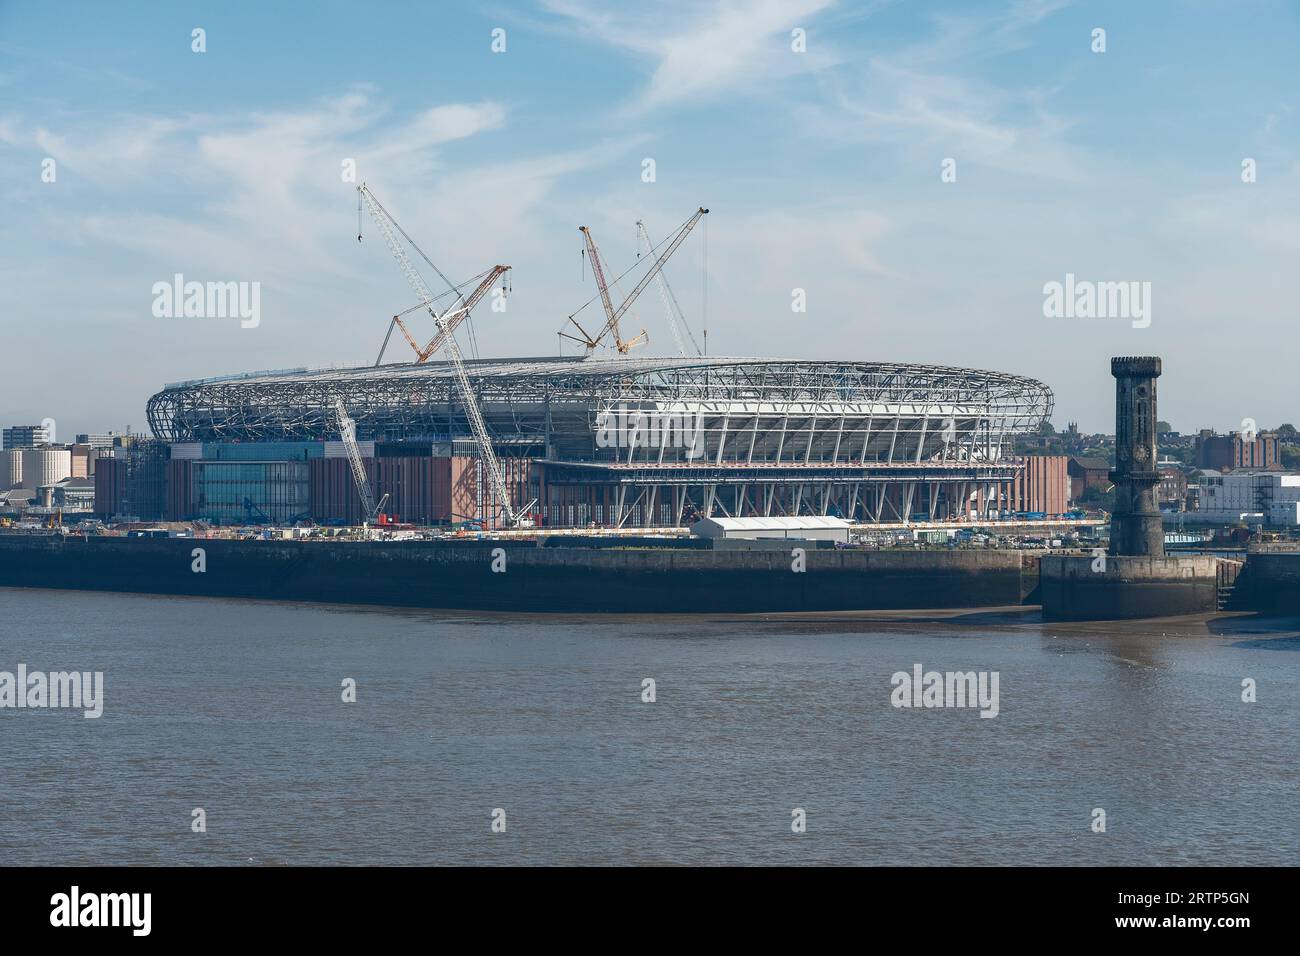 The new stadium for Everton Football Club under construction in Liverpool UK Stock Photo